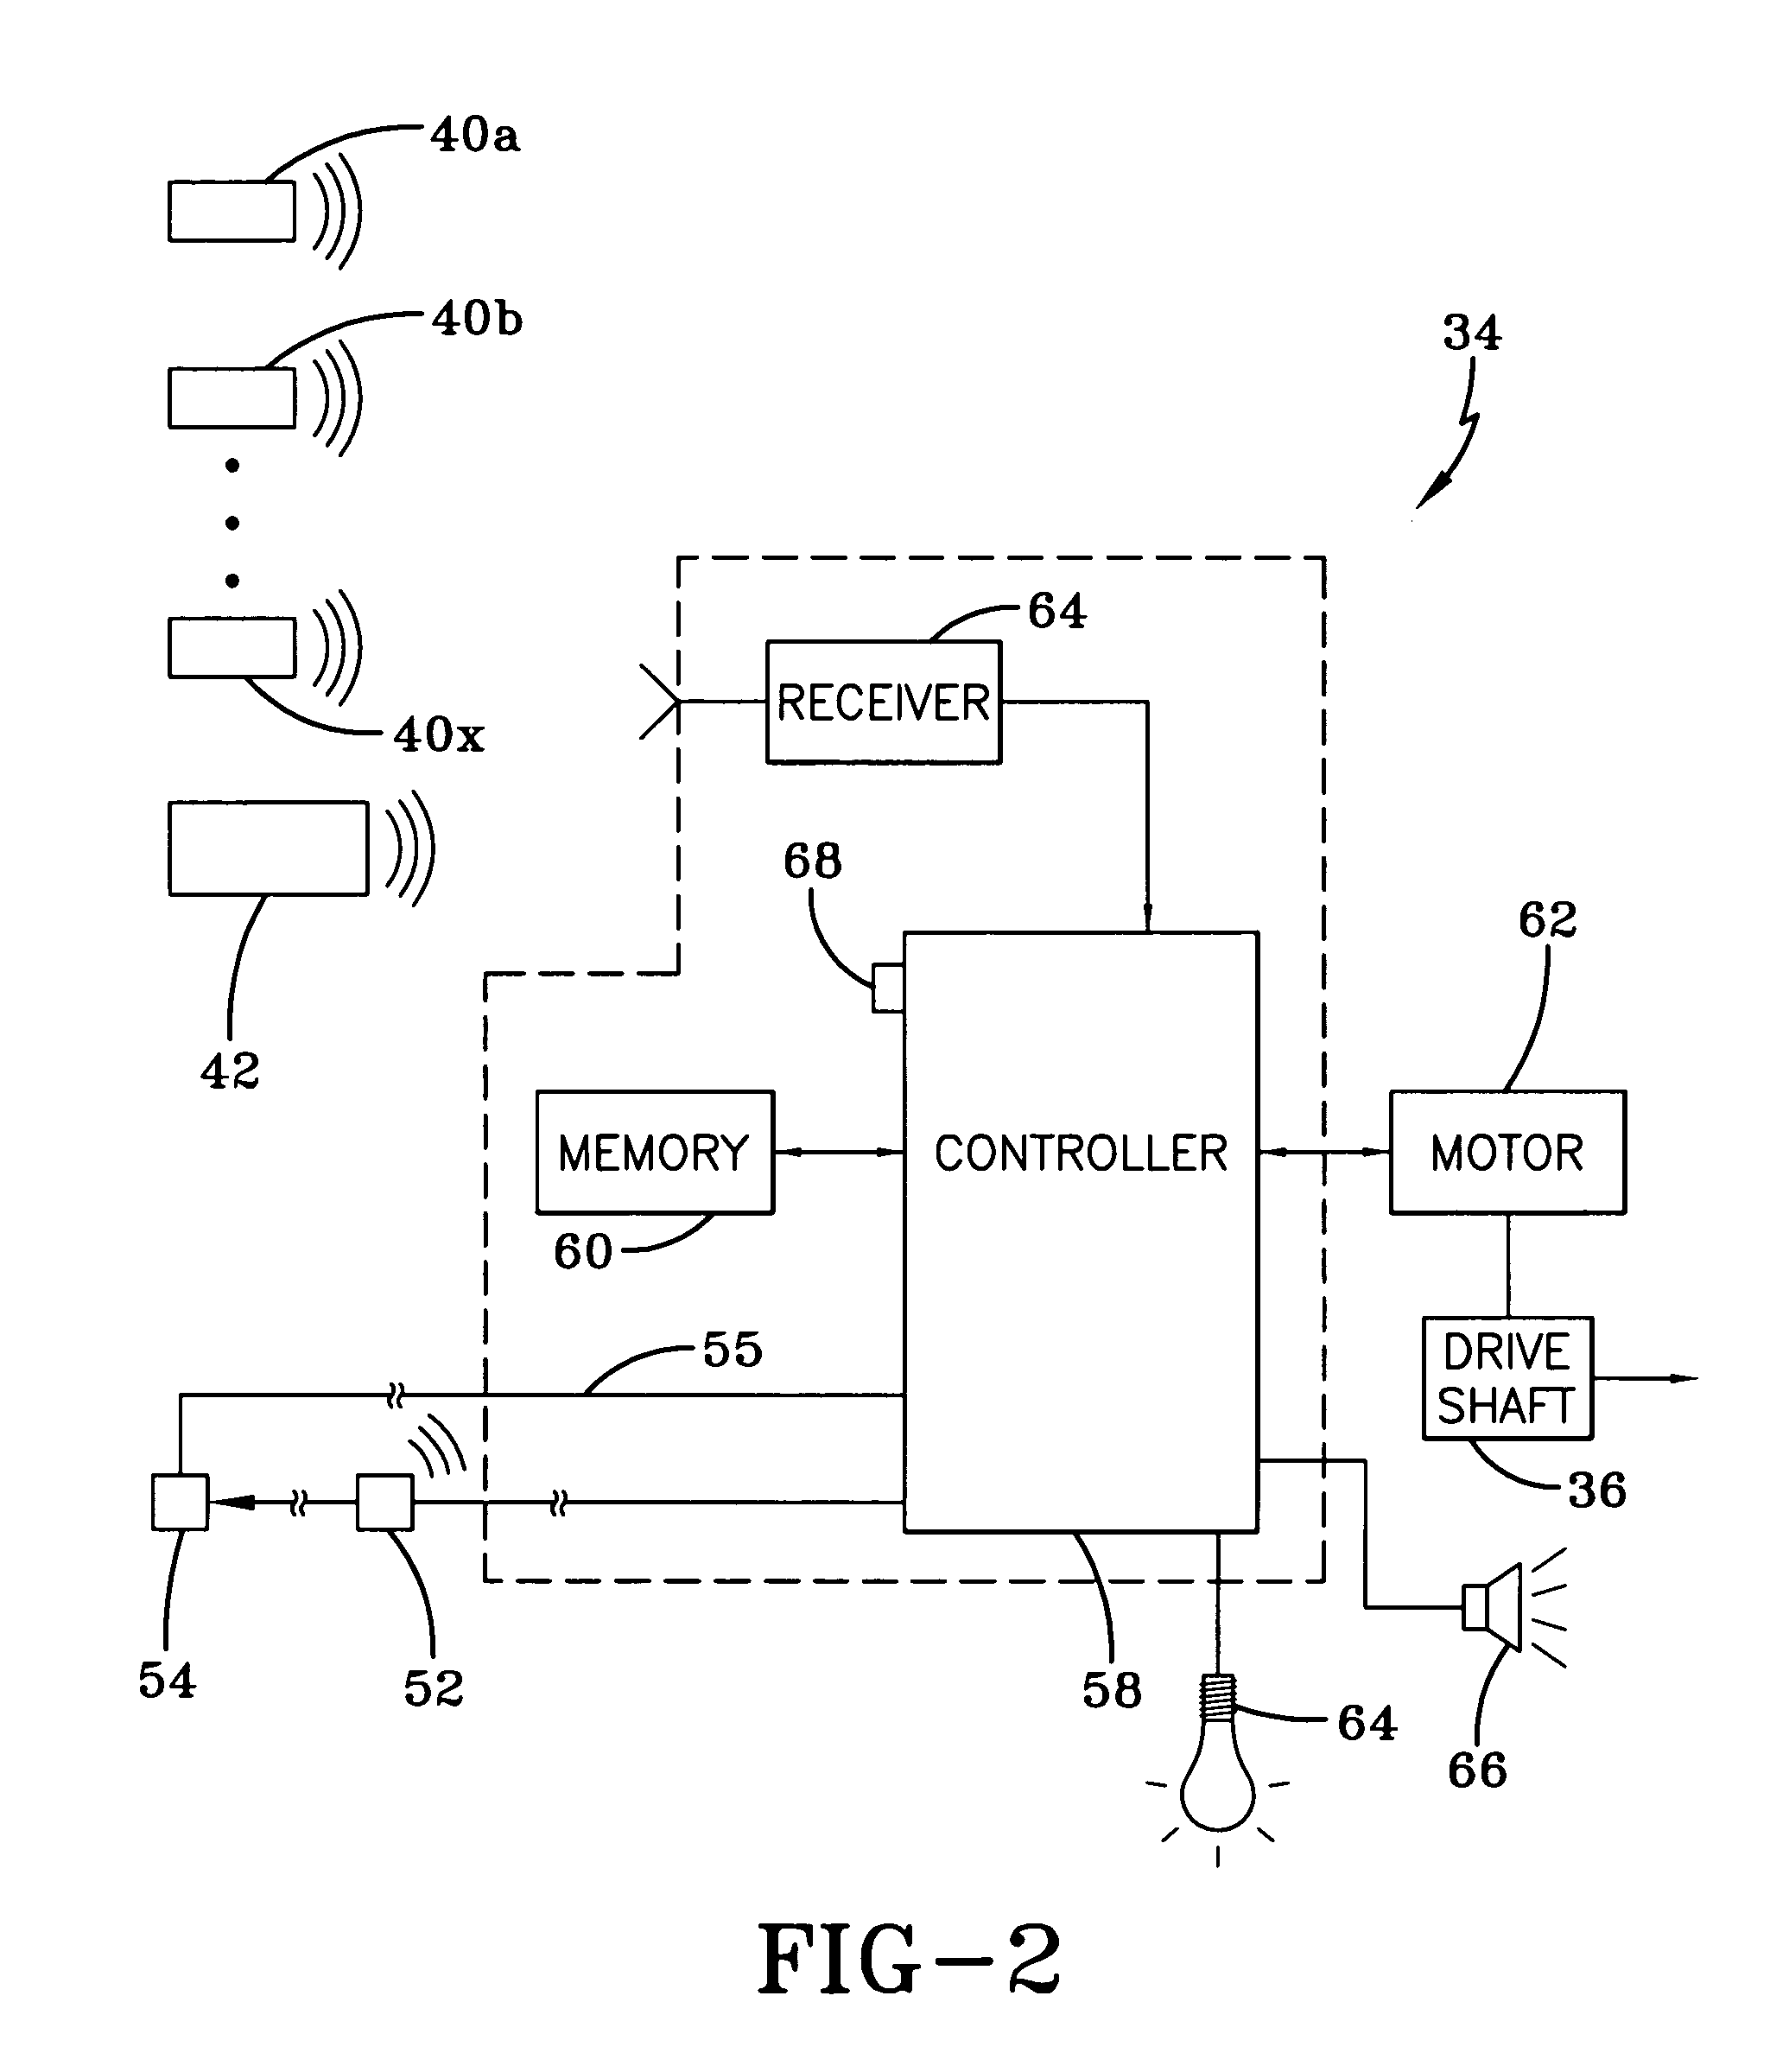 Motorized barrier operator system for controlling a barrier after an obstruction detection and related methods